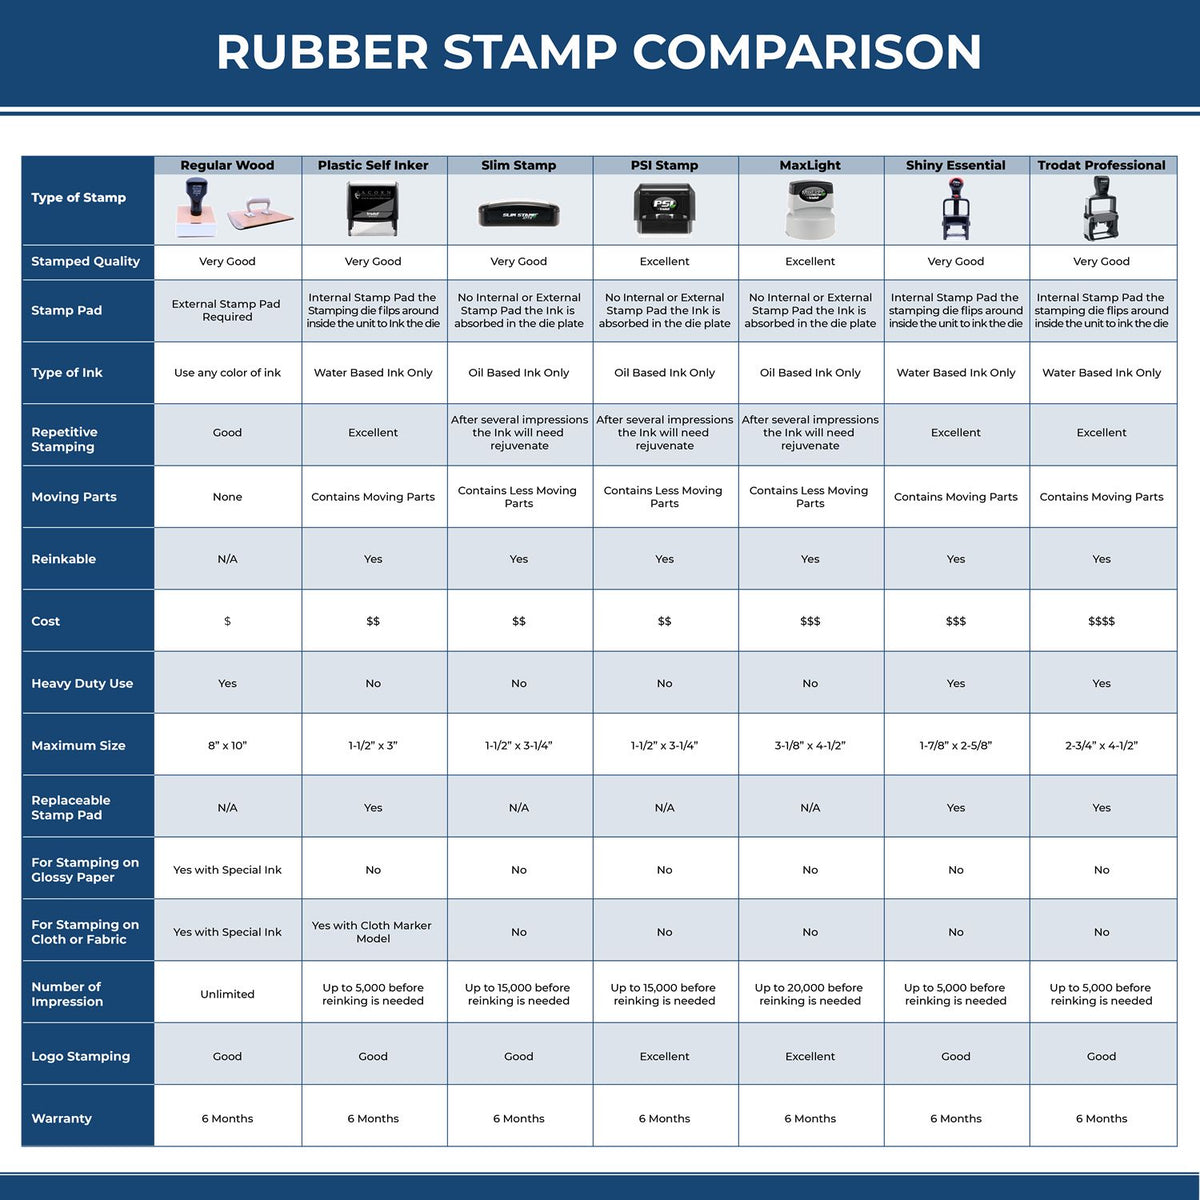 A comparison chart for the different types of mount models available for the Self-Inking Vermont Landscape Architect Stamp.